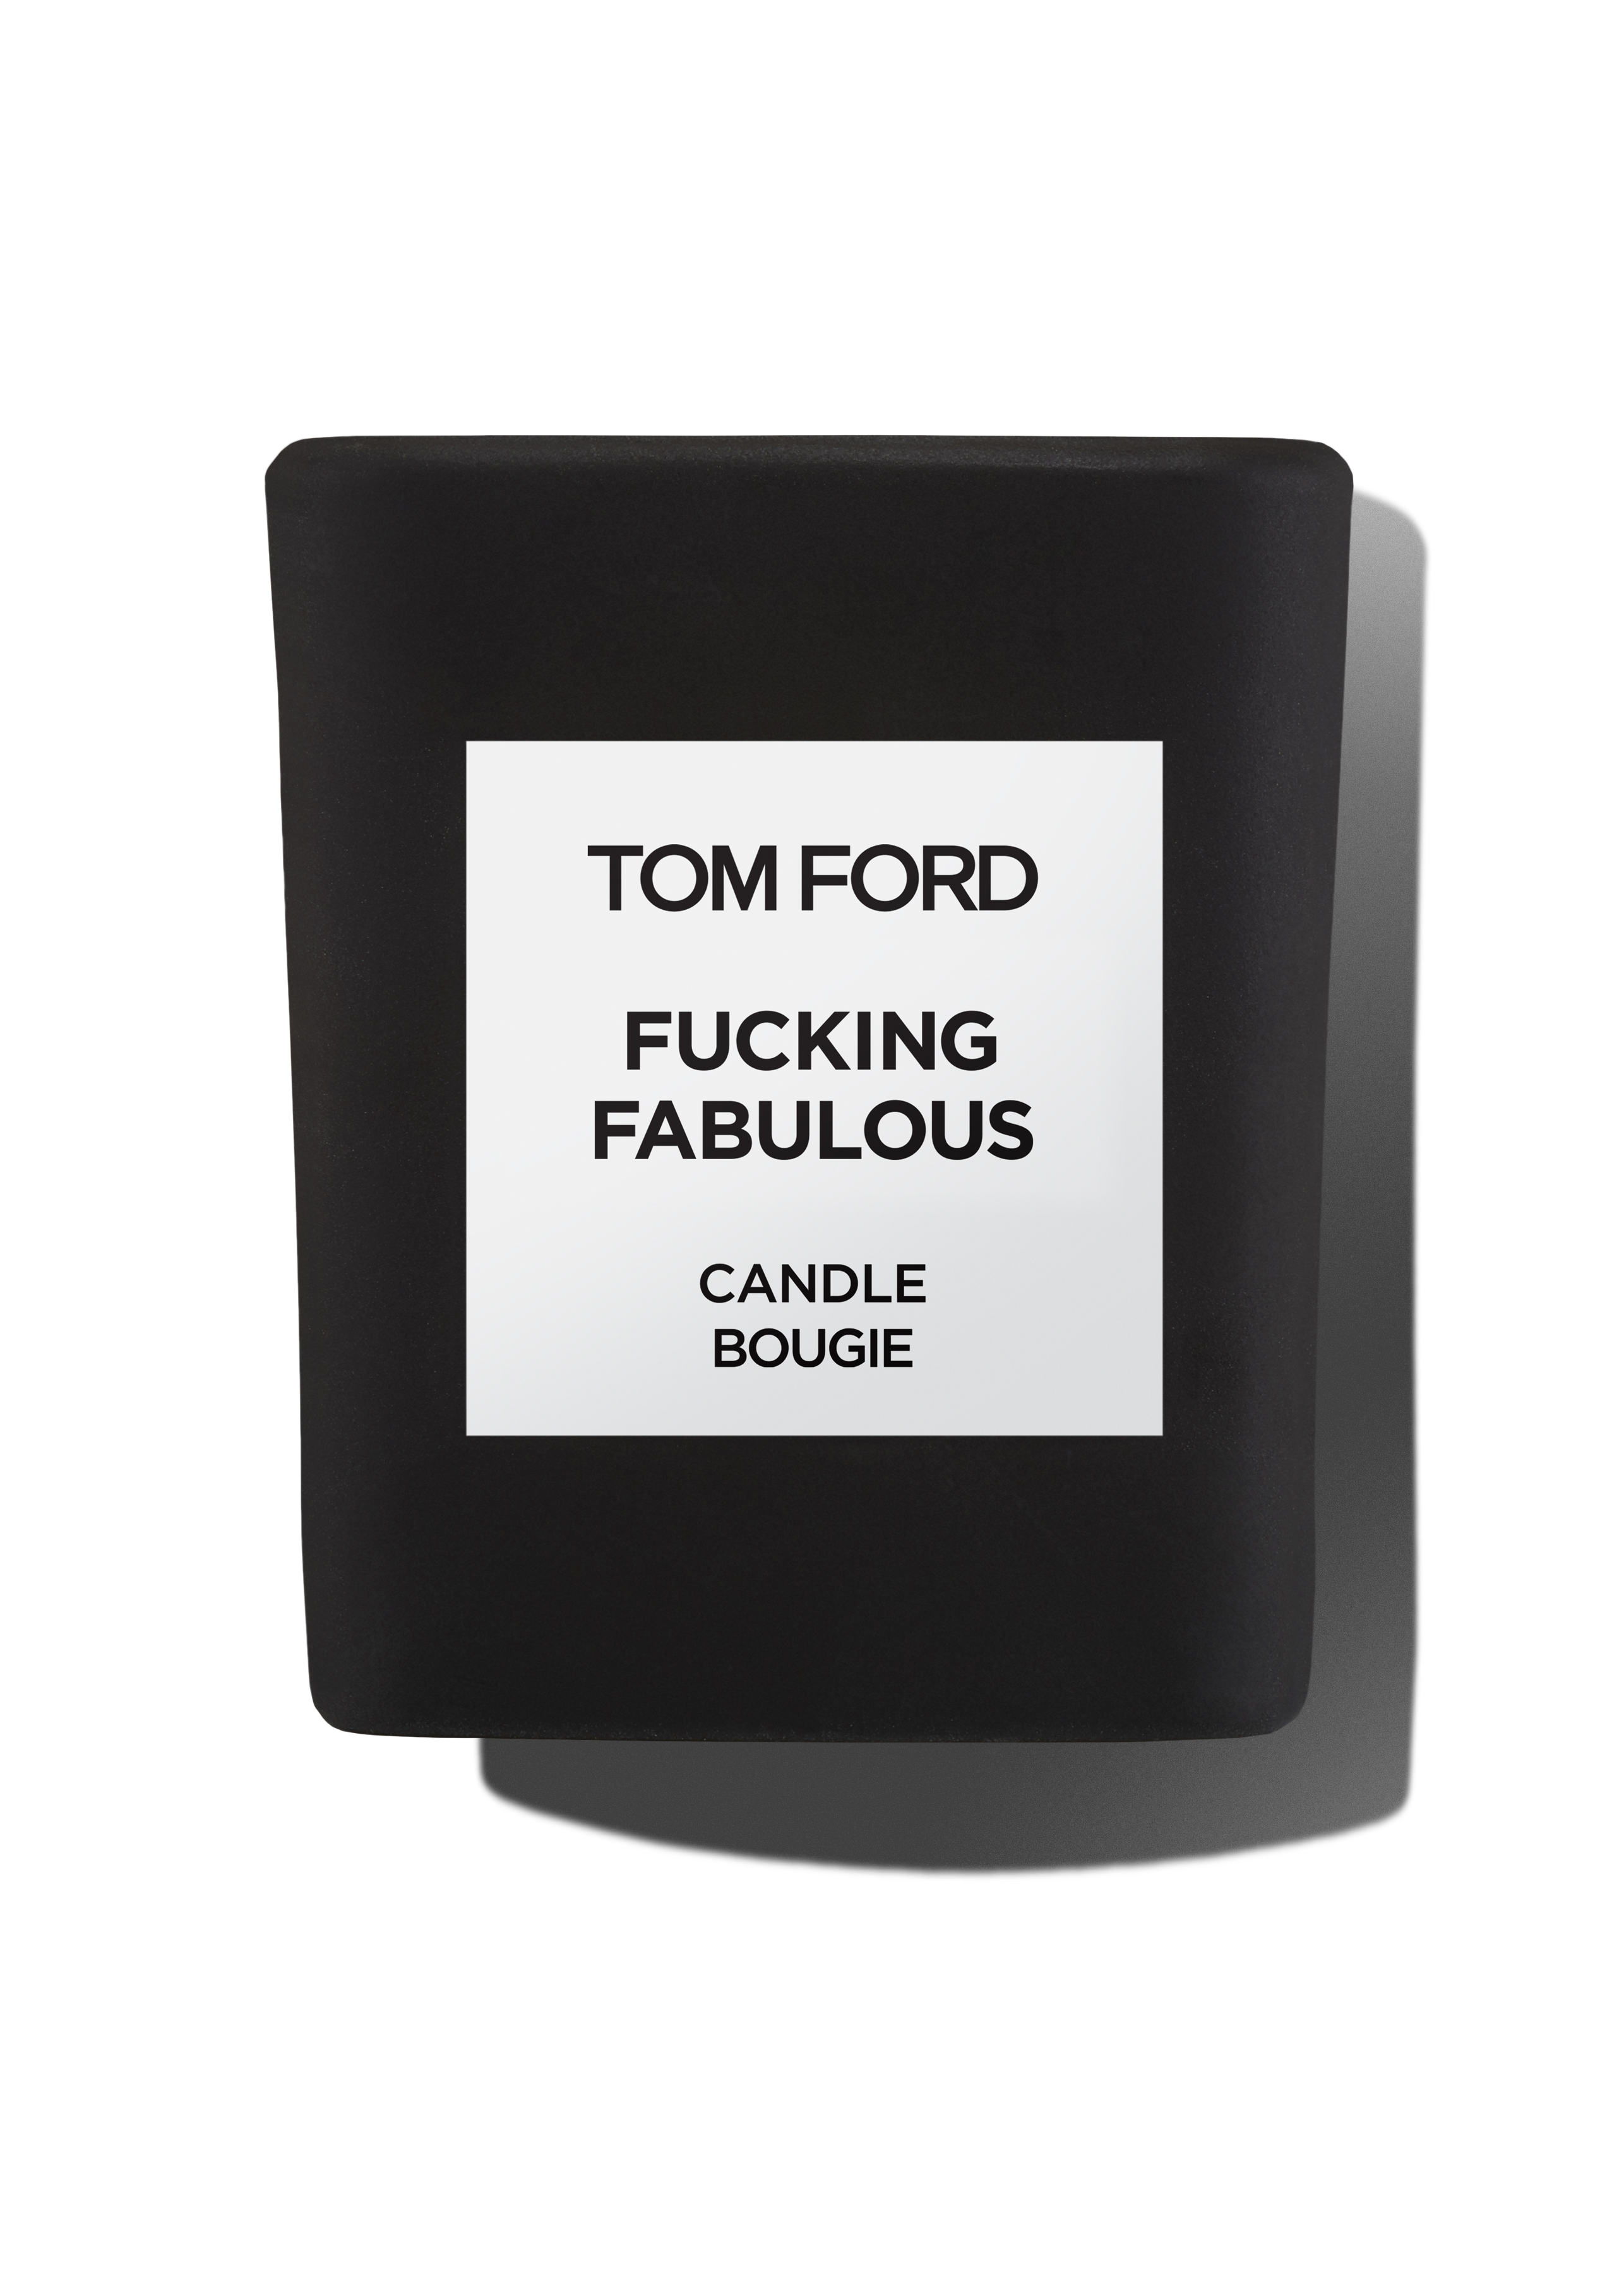 Candles - Fragrance | Beauty TomFord.com